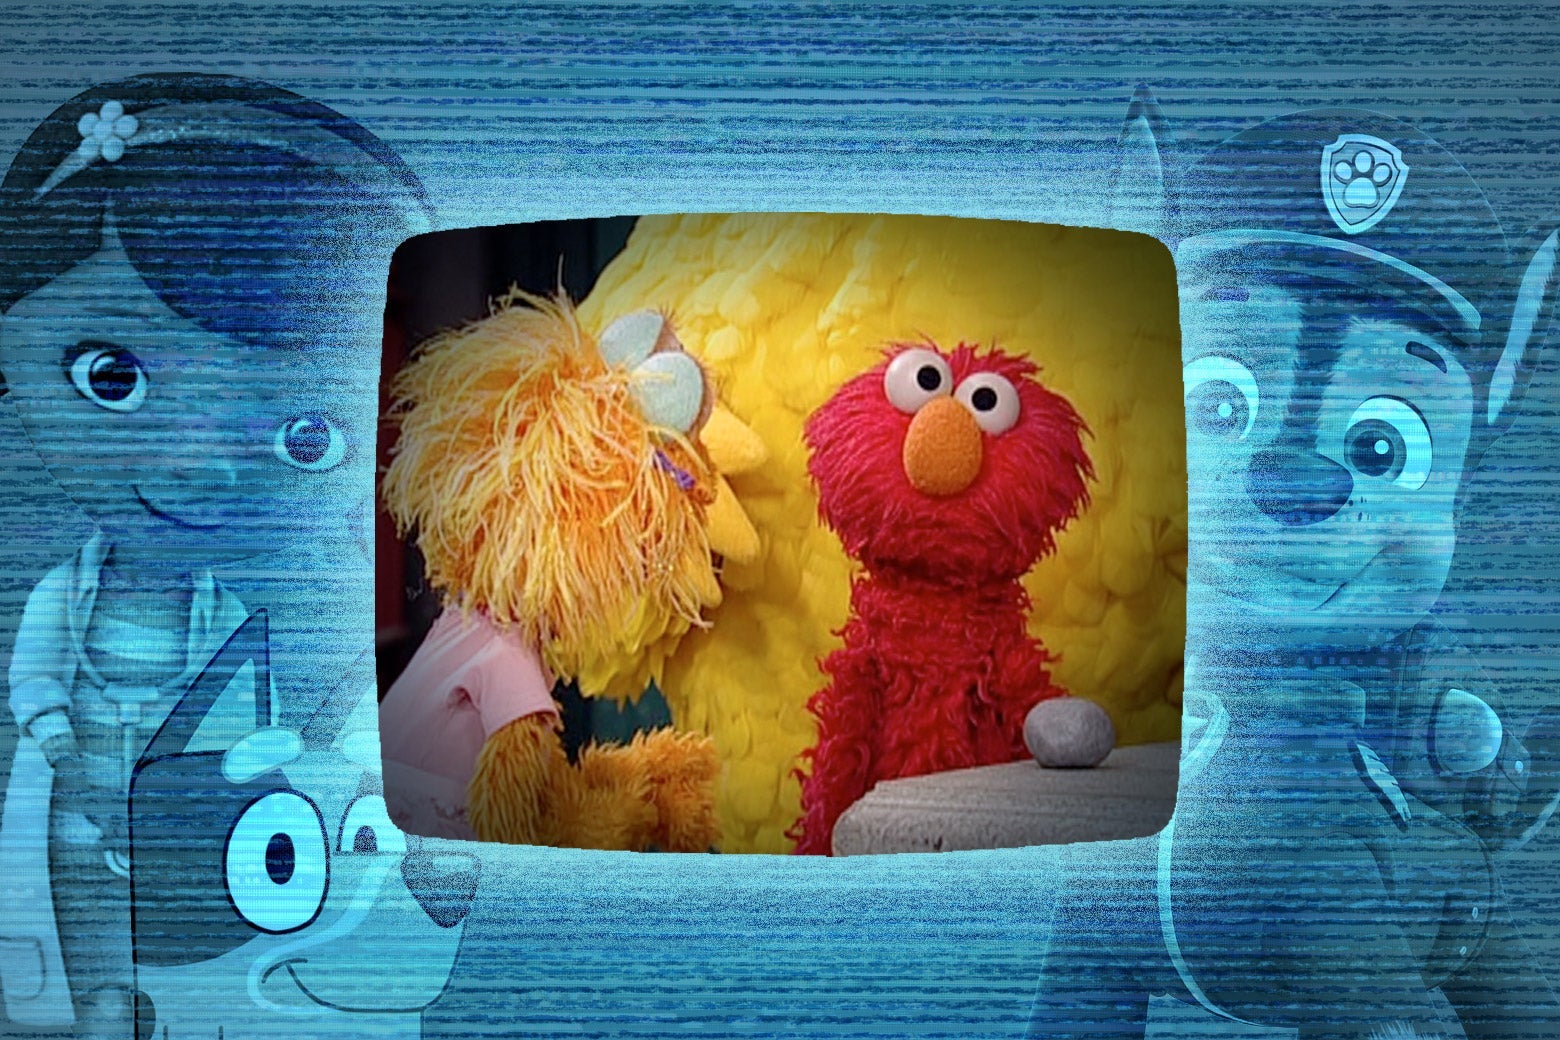 Elmo vs. Rocco memes: Viral moment is a taste of how parents watch  children's TV.